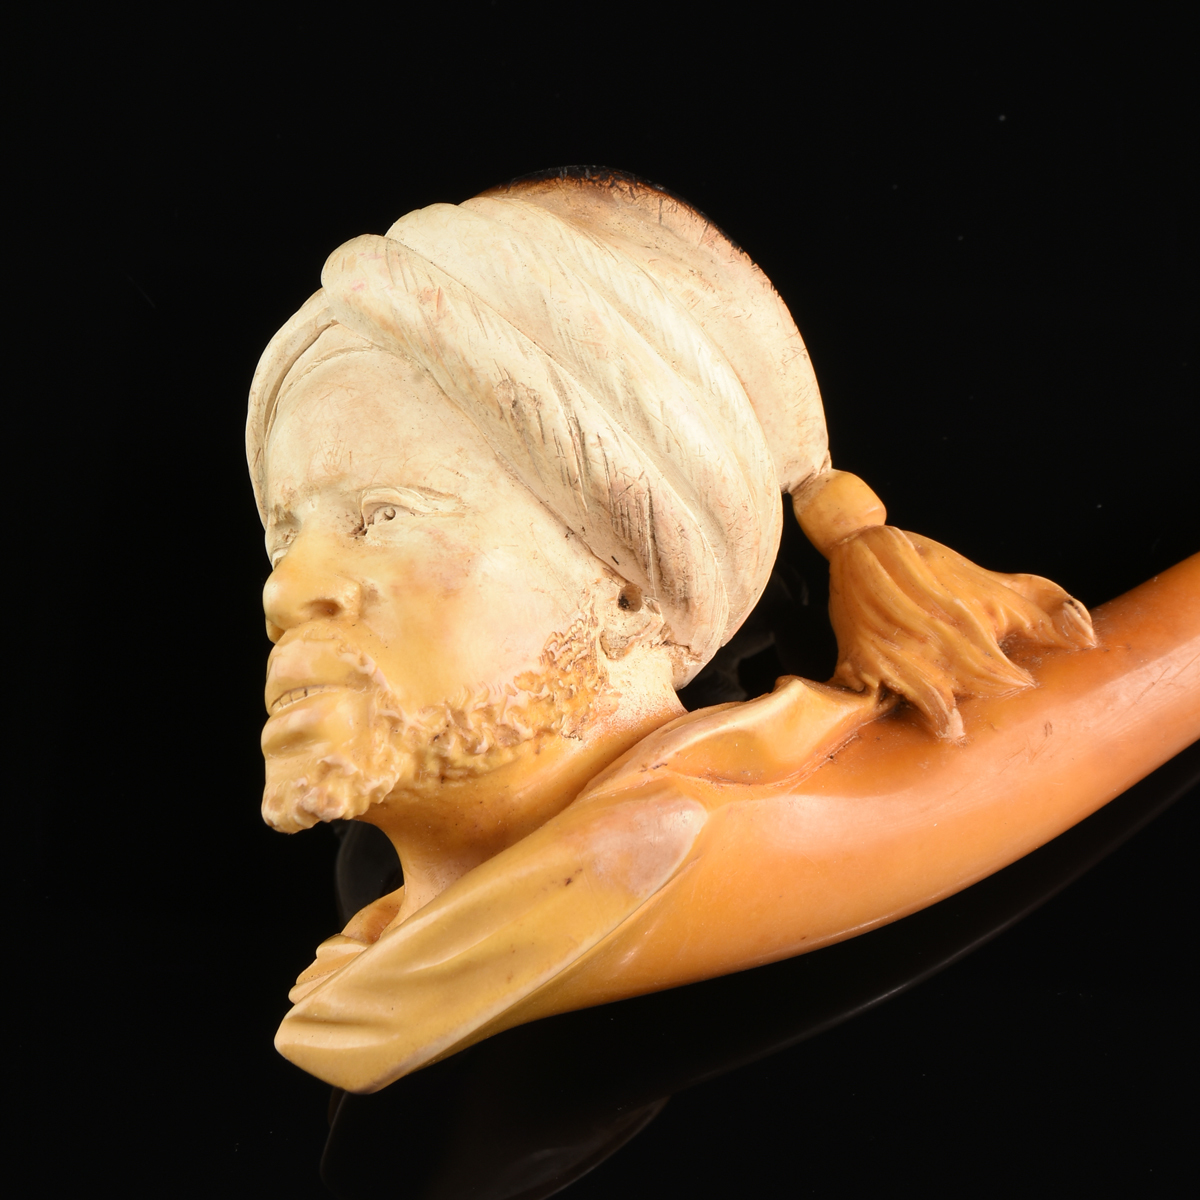 A GROUP OF THREE MEERSCHAUM TOBACCO PIPES, LATE 19TH/EARLY 20TH CENTURY, carved in the form of a - Image 8 of 9